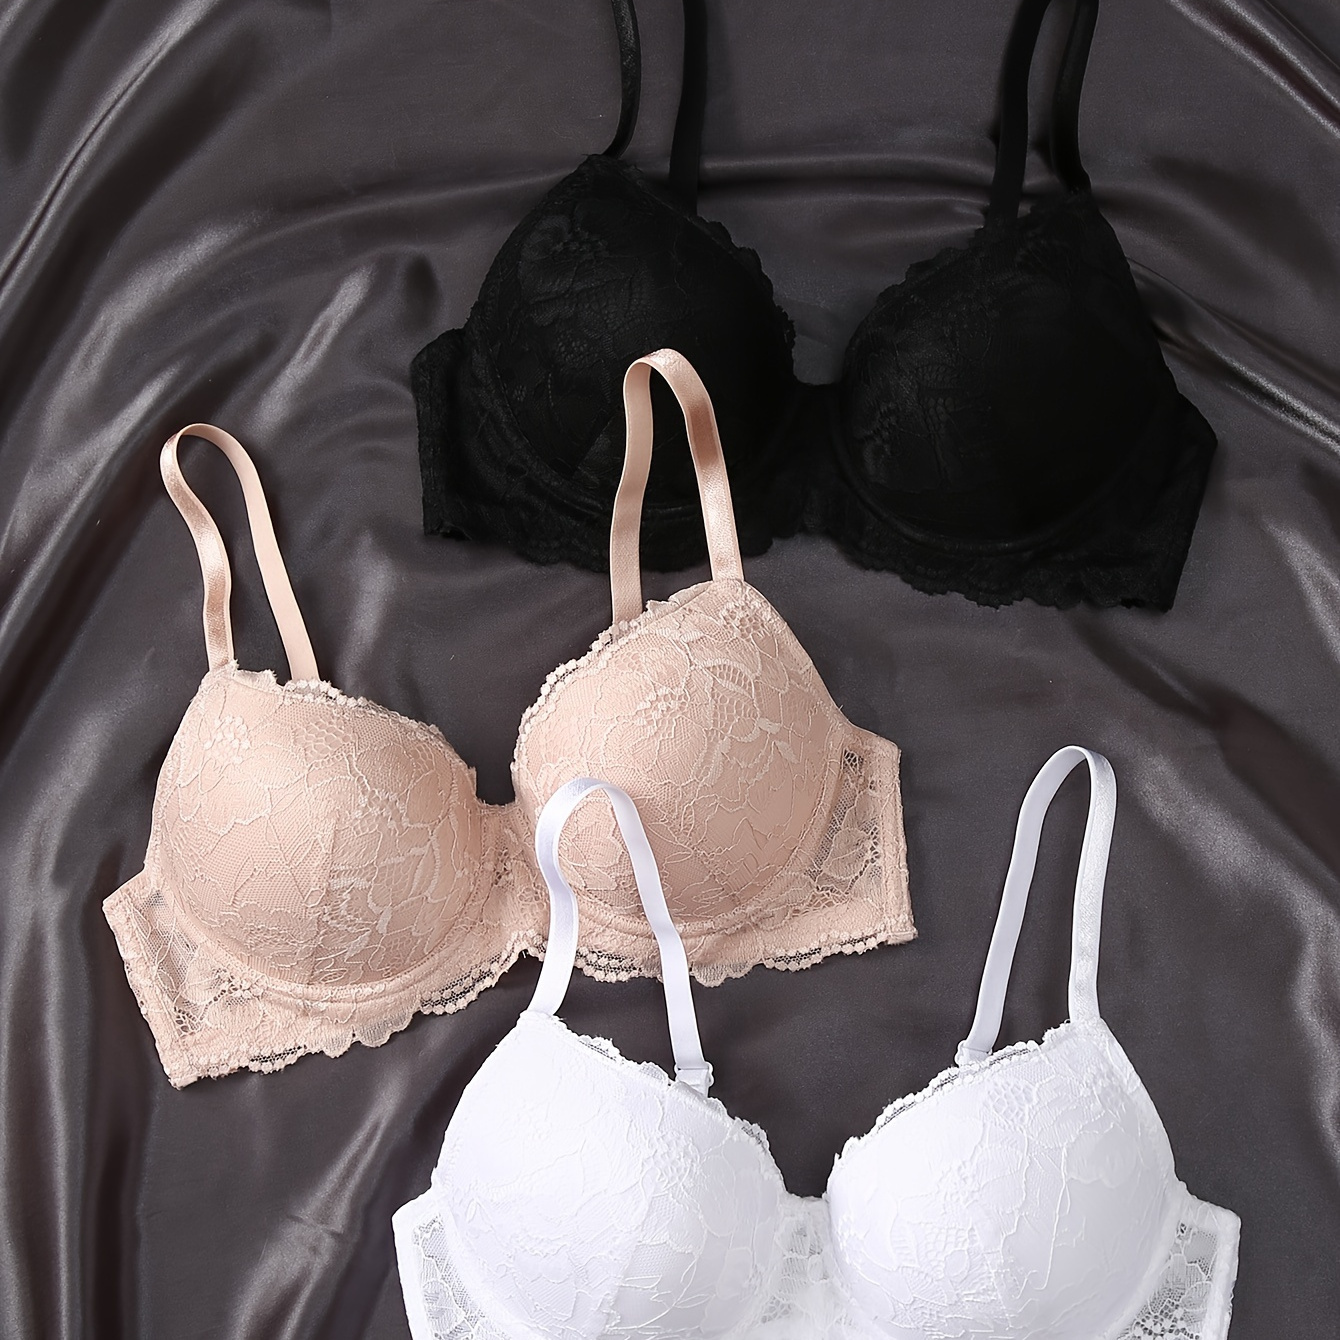 Stylish Comfortable Padded Bra Which Makes Stock Photo 1438914095